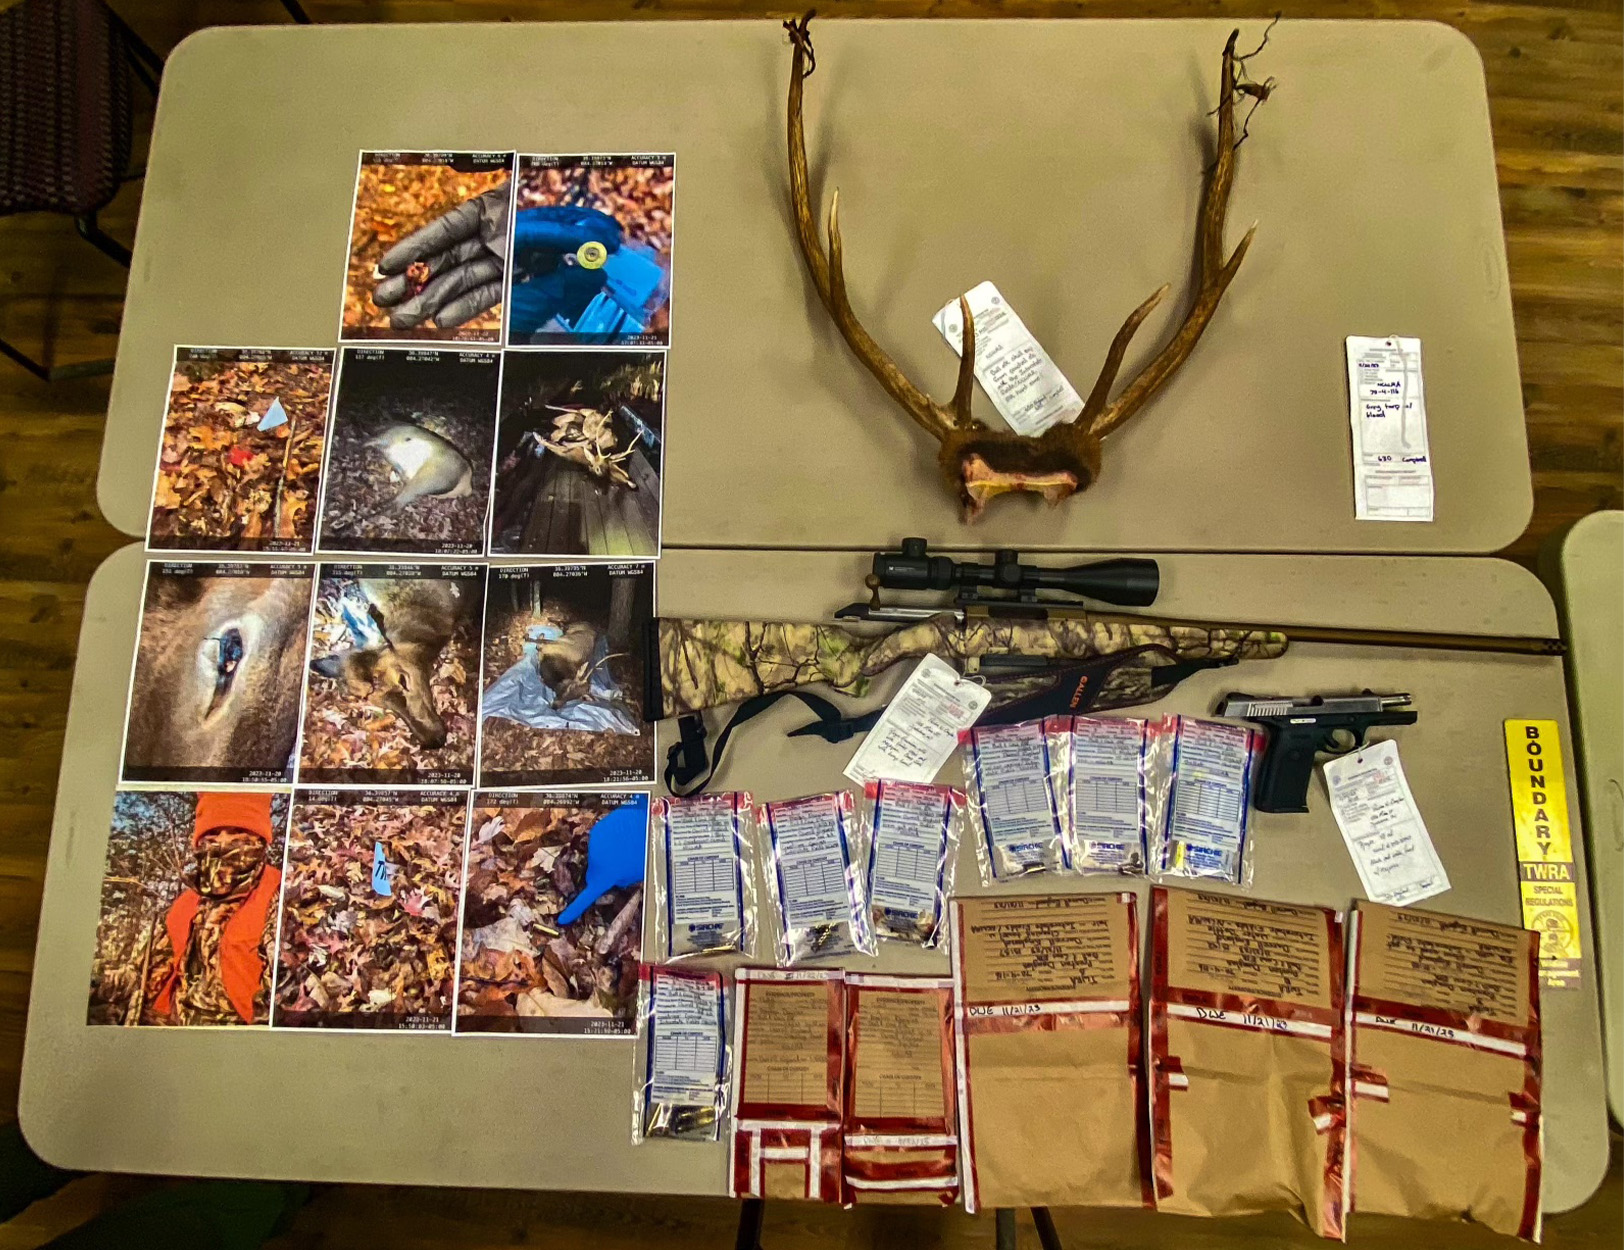 Photos from Tennesee poaching investigation.